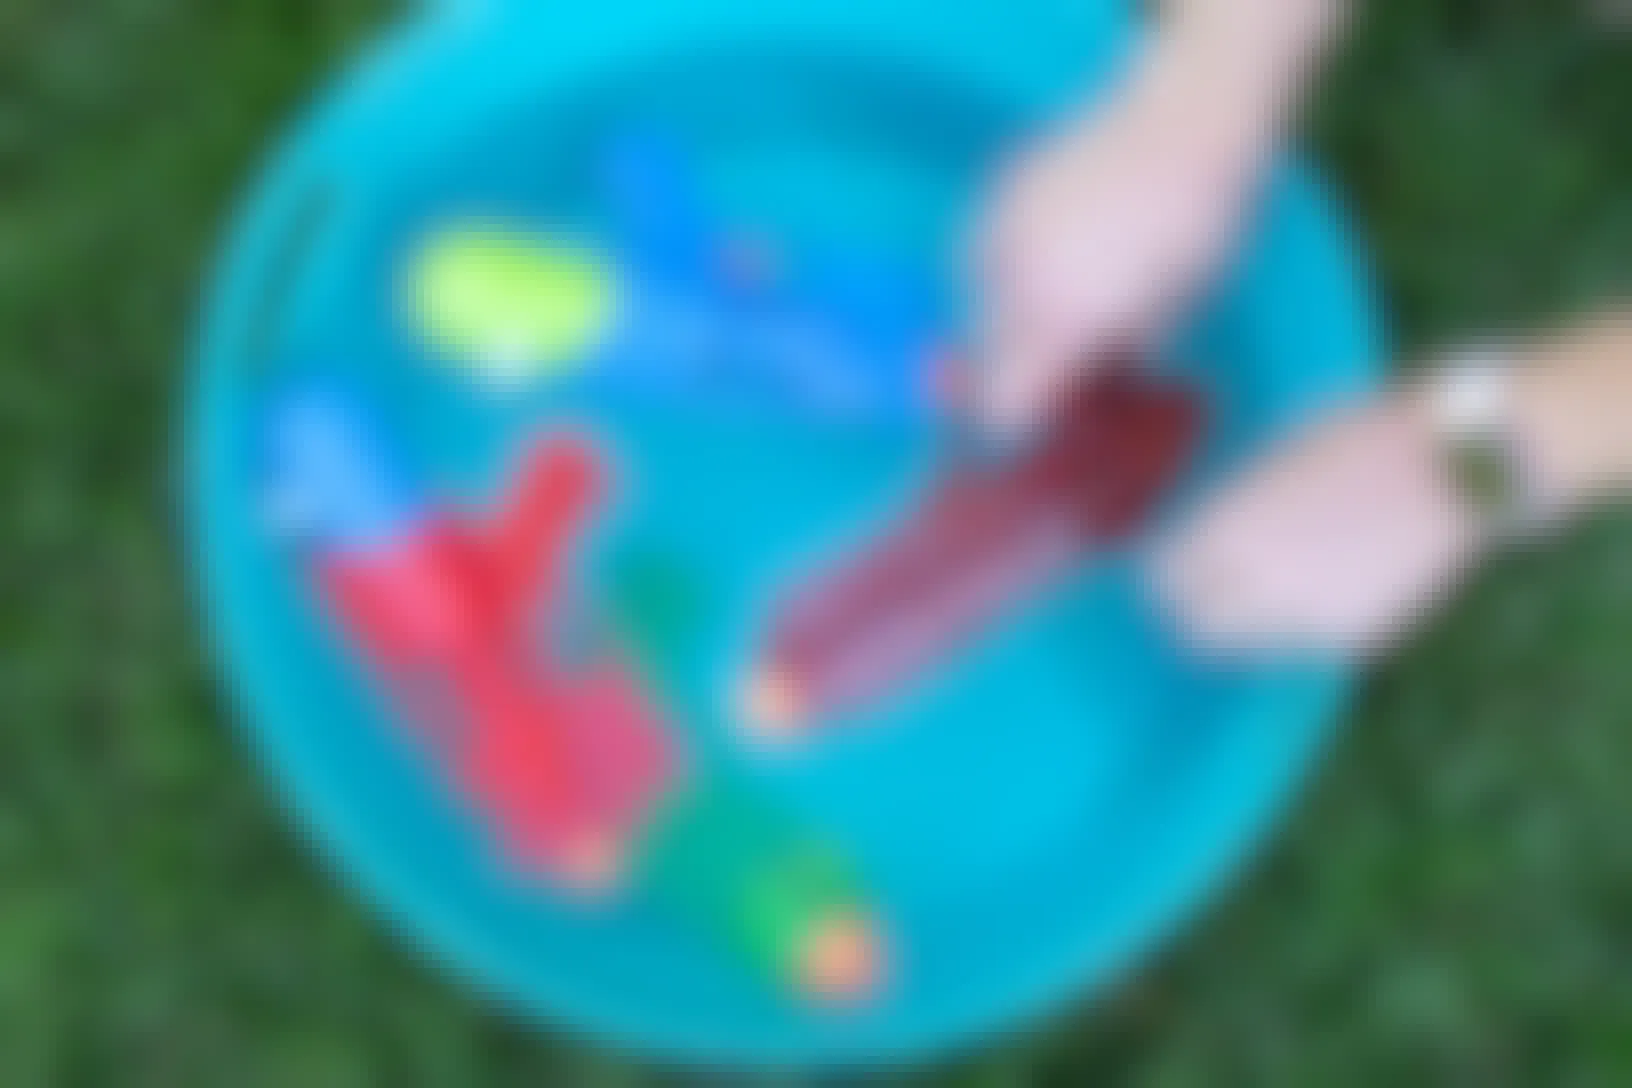 A person's hands reaching to take a water gun from a bucket filled with water and two more water guns.